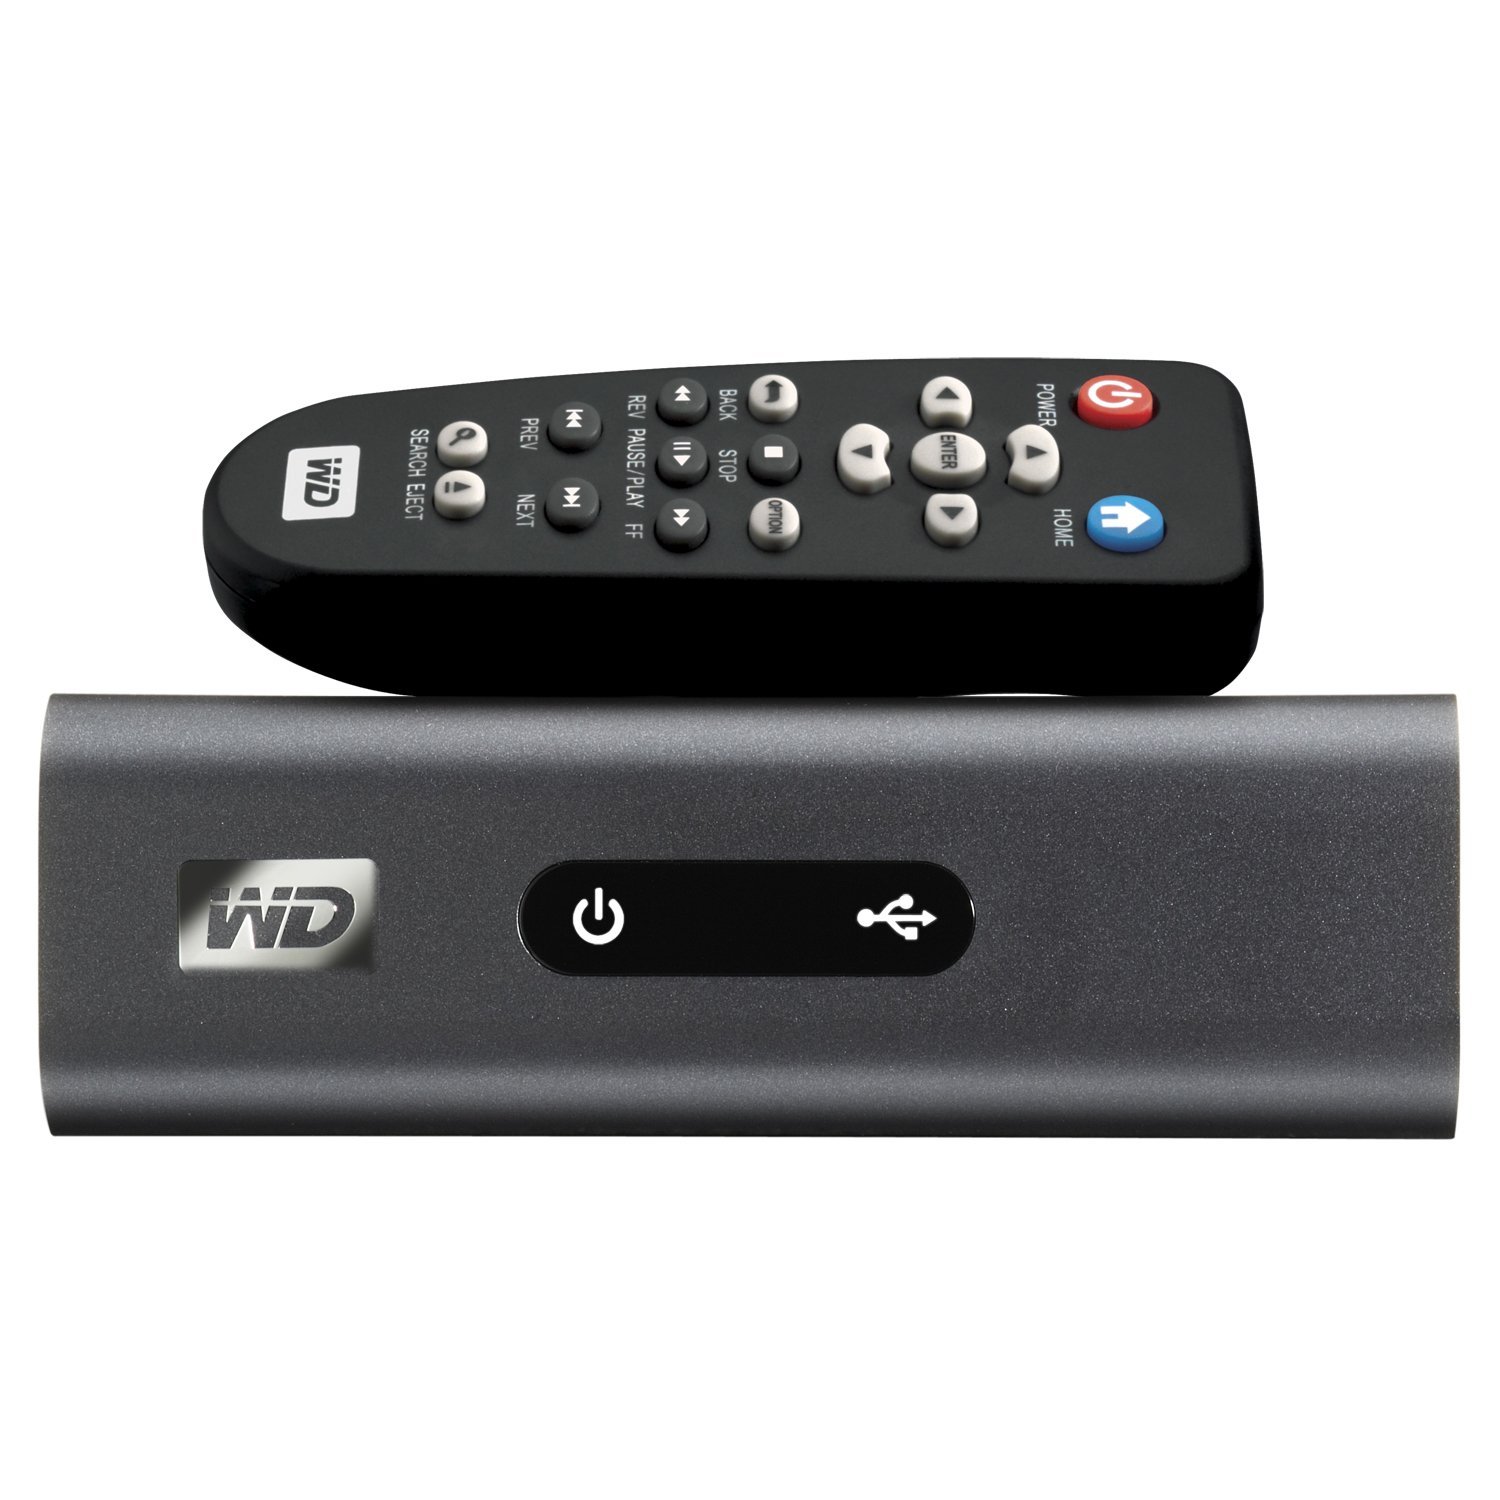 http://thetechjournal.com/wp-content/uploads/images/1107/1312108722-western-digital-wd-tv-live-plus-1080p-hd-media-player-1.jpg